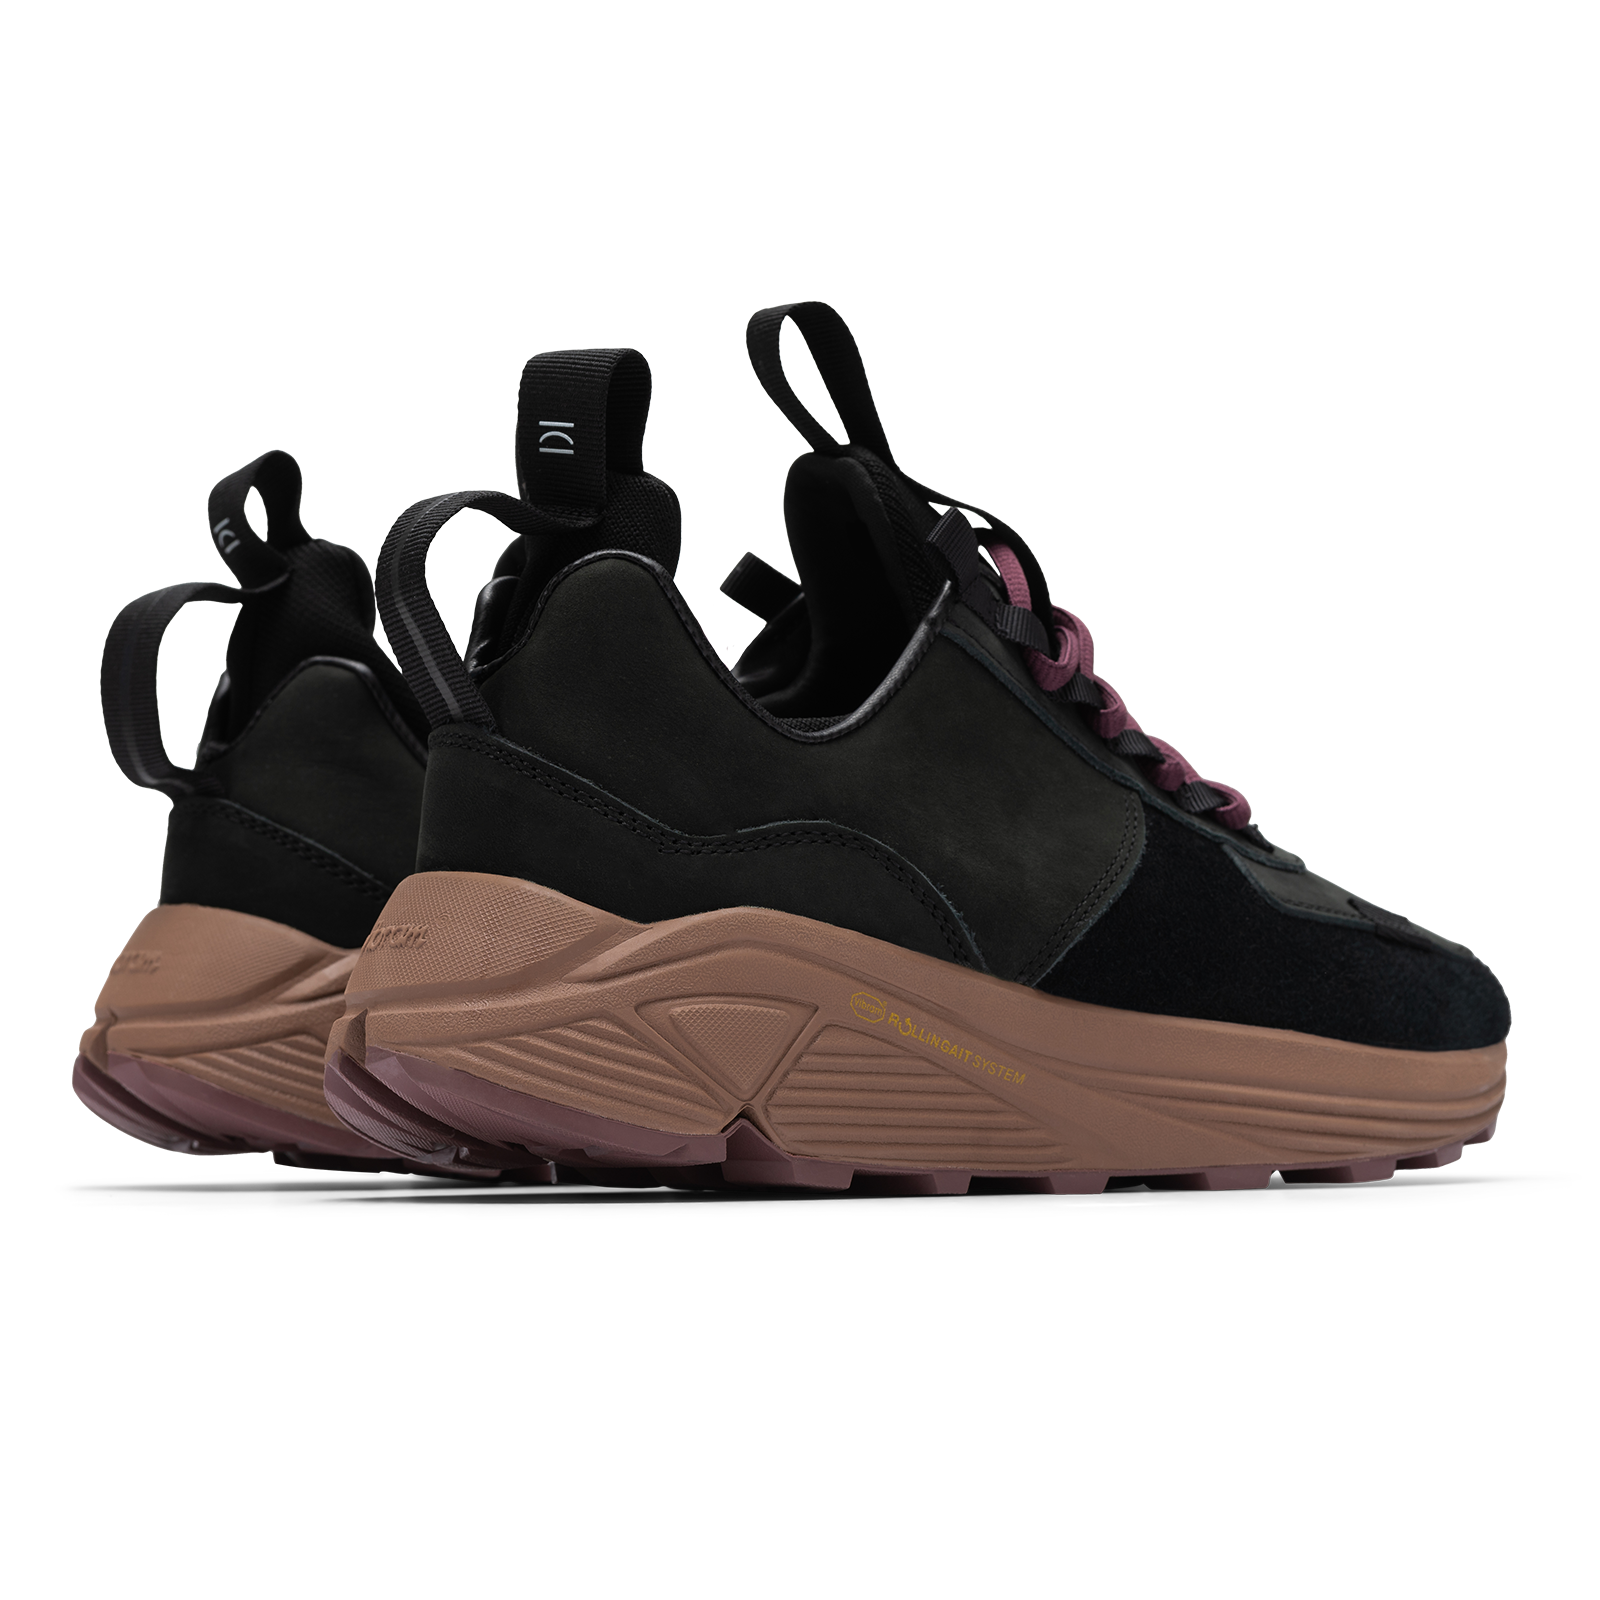 Back 3/4 view, Contera Iron Oxide is a runner with Black suede and numbuck upper, stretch mesh internal bootie, webbing heel and tongue pulls, webbing lace holder, brown vibram midsole burgundy vibram rubber bottom.